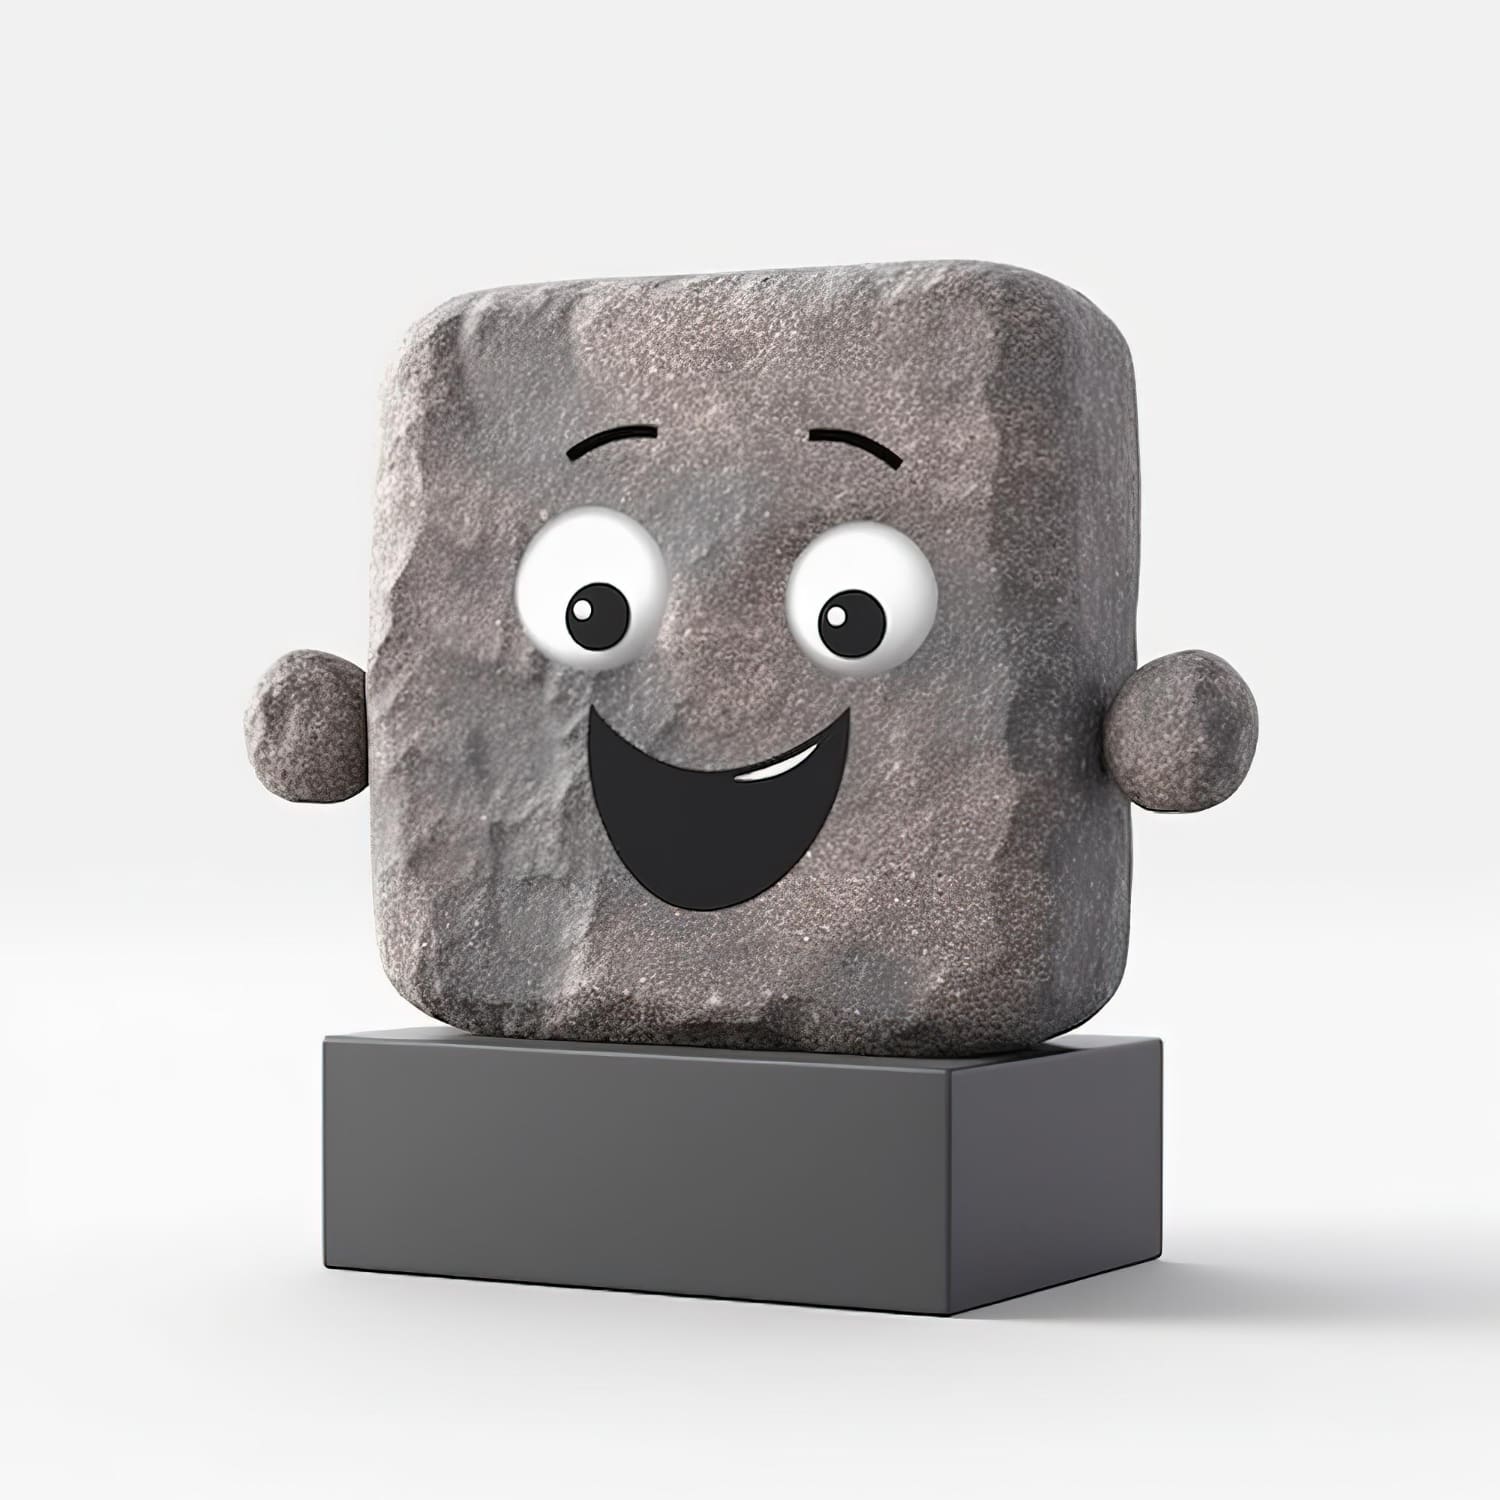 3d render abstract emotional face icon square emoji cute silly cubic toy